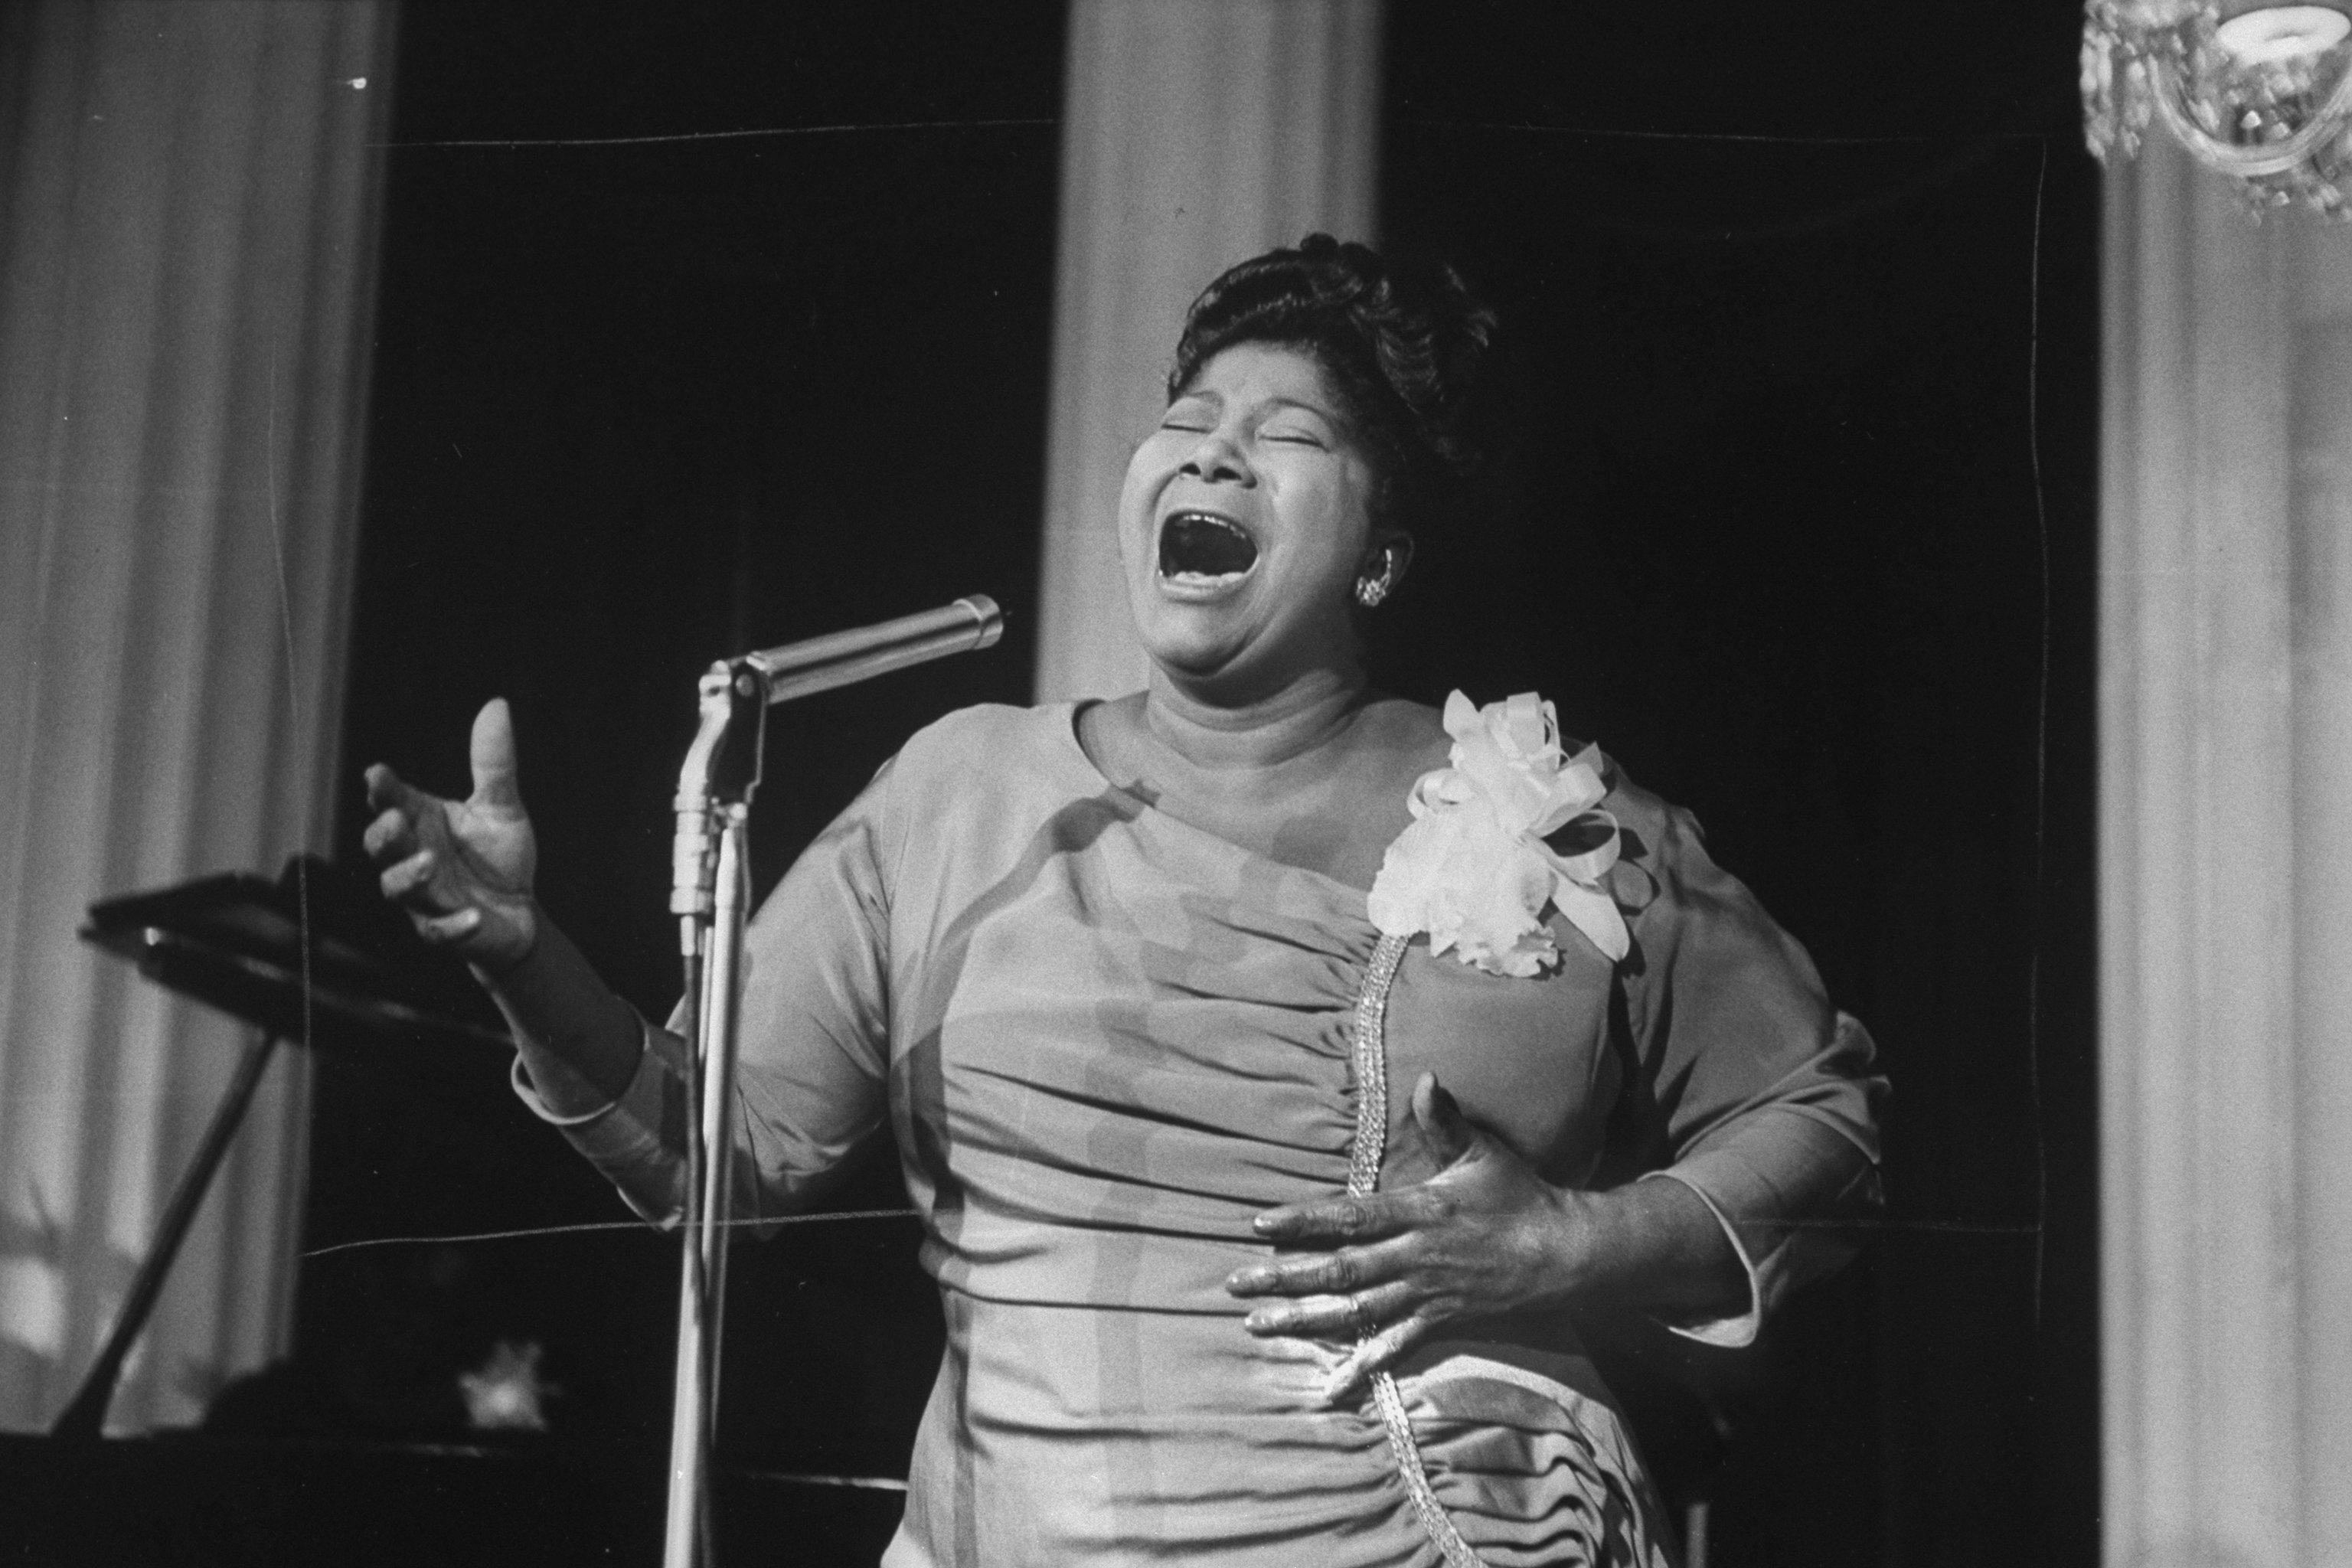 Singer Mahalia Jackson singing at a reception in a hotel. | Photo by Don Cravens/The LIFE Images Collection via Getty Images